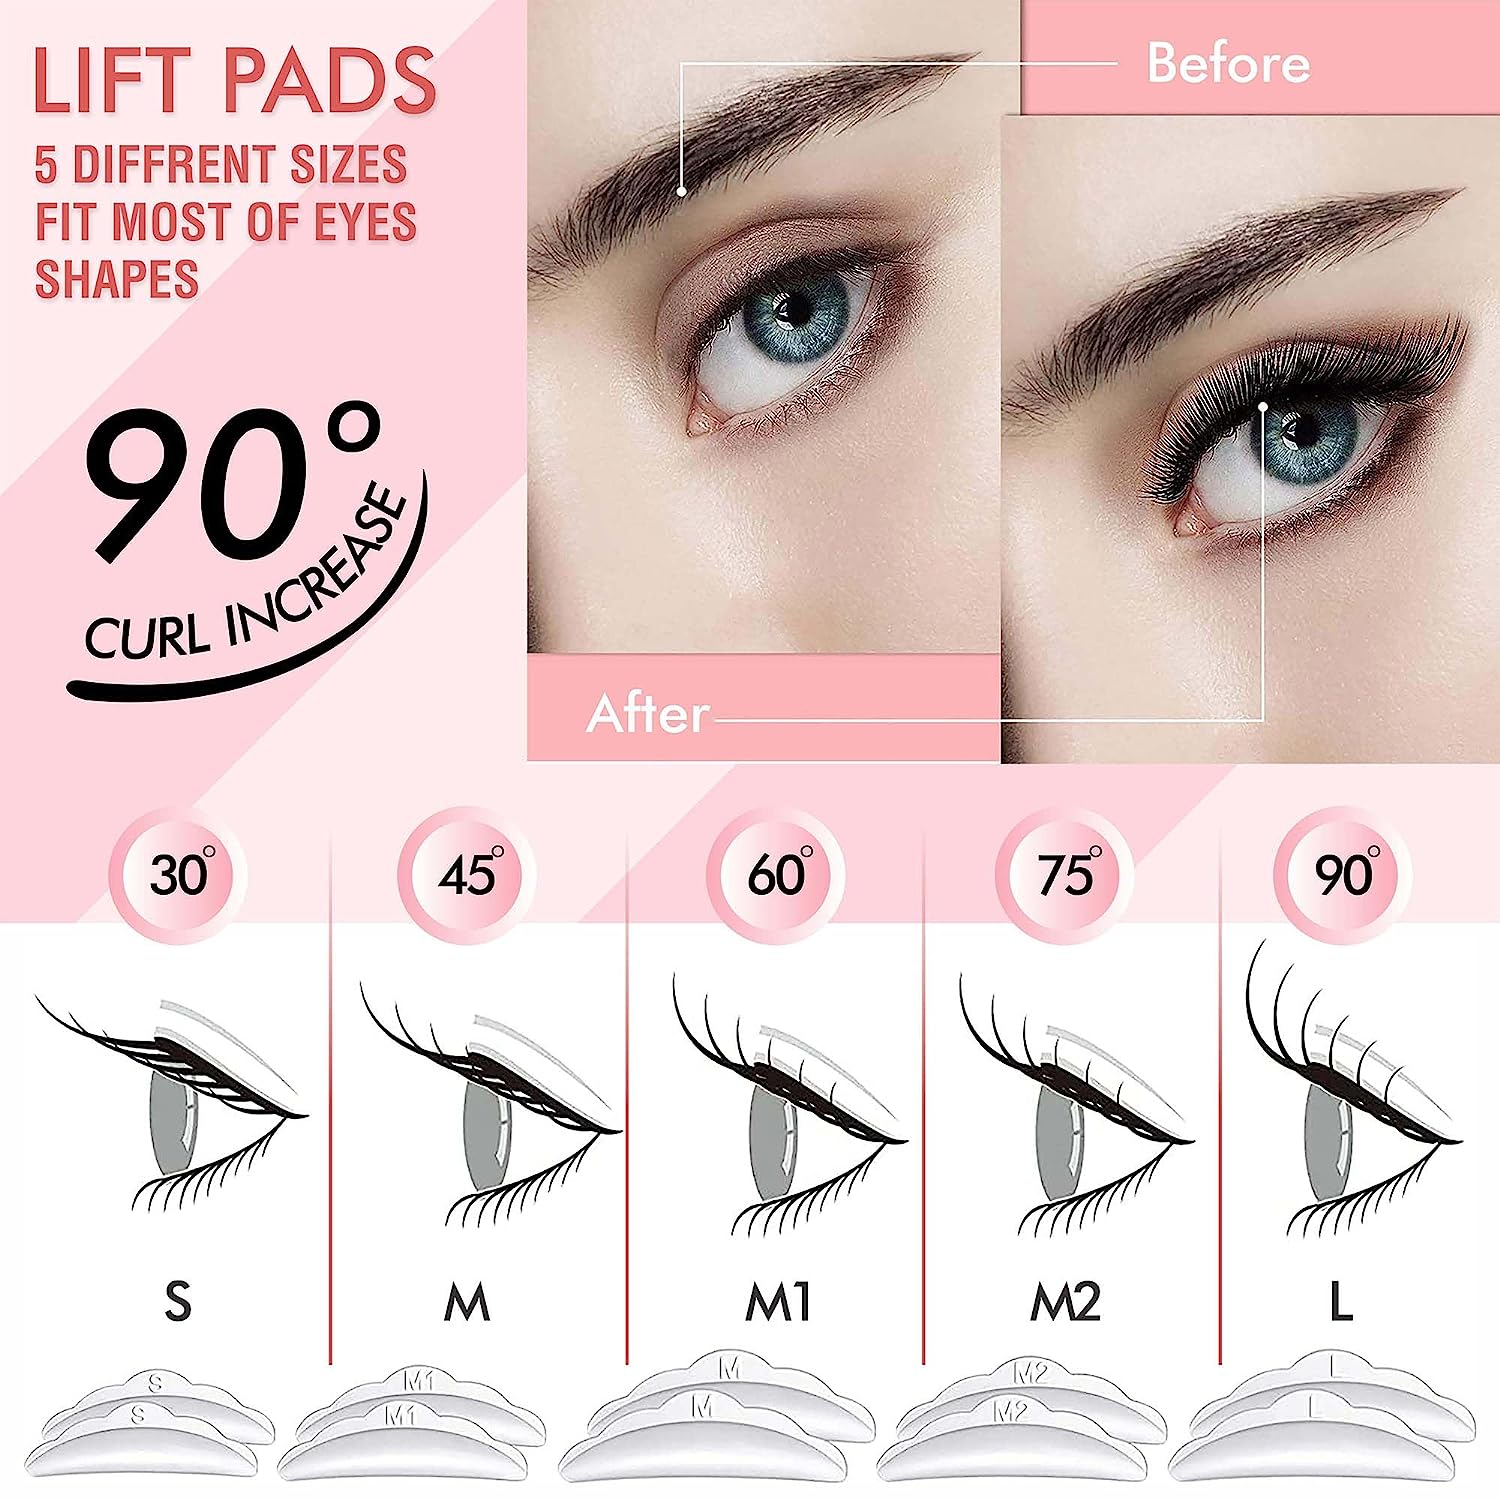 Updated　Version　Lift　Our　with　TG　Your　Transform　Kit　Emporium　for　Stunning　2023　Card　Lash　Look　Lift　Kit　Premium　Luxe　Tint　Unleash　Detailed　Lash　Eyes,　and　Instruction　with　to　Home　and